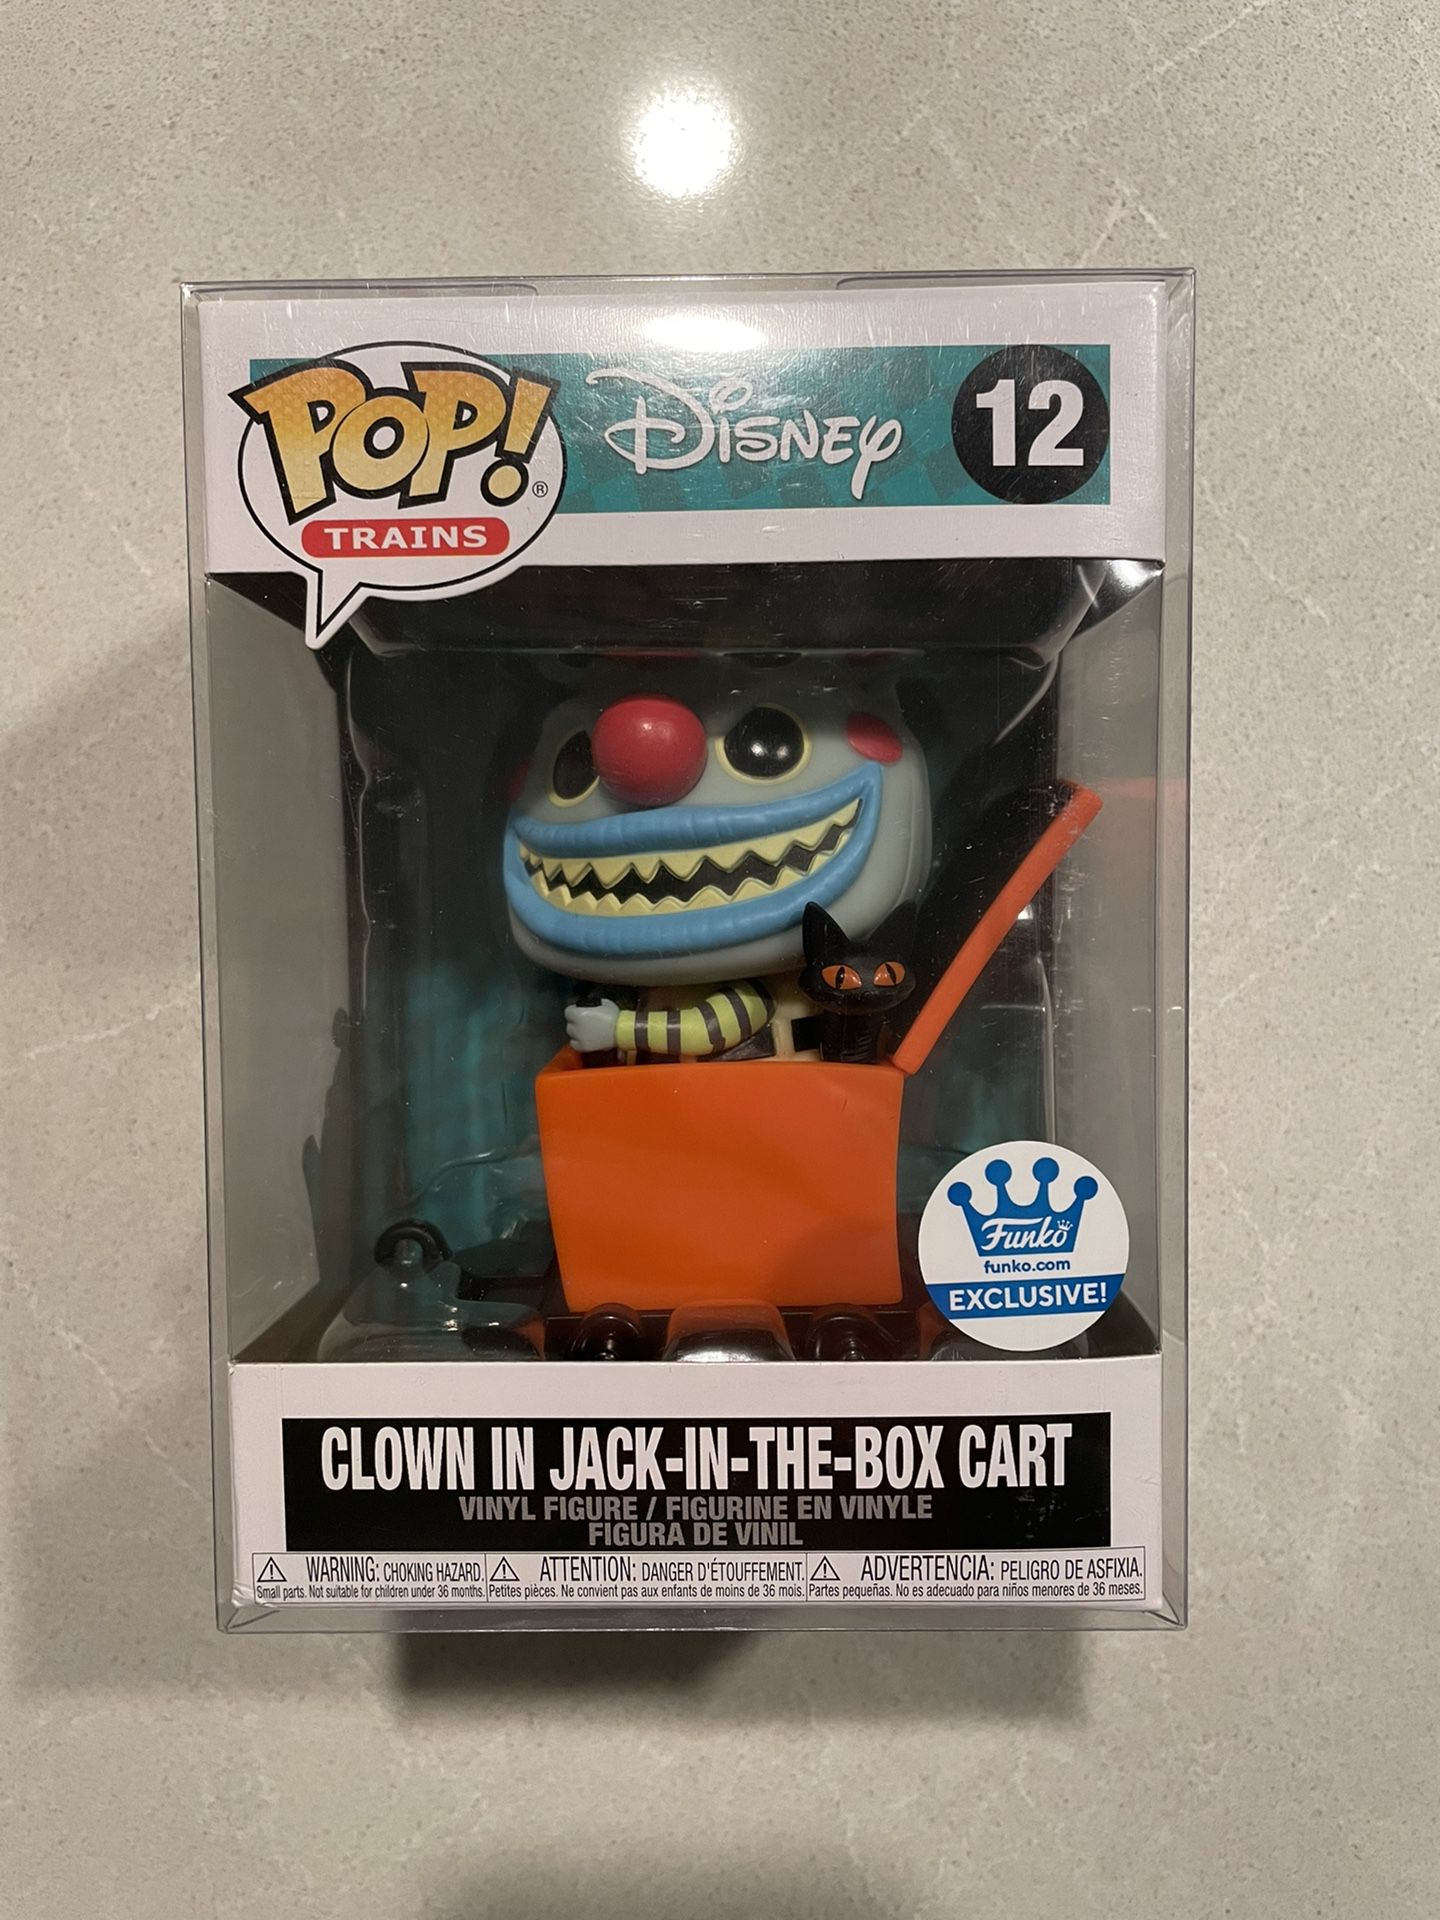 Clown Jack In The Box Cart Funko Pop Shop Exclusive Disney Nightmare Before Christmas Train 12 with protector NBC